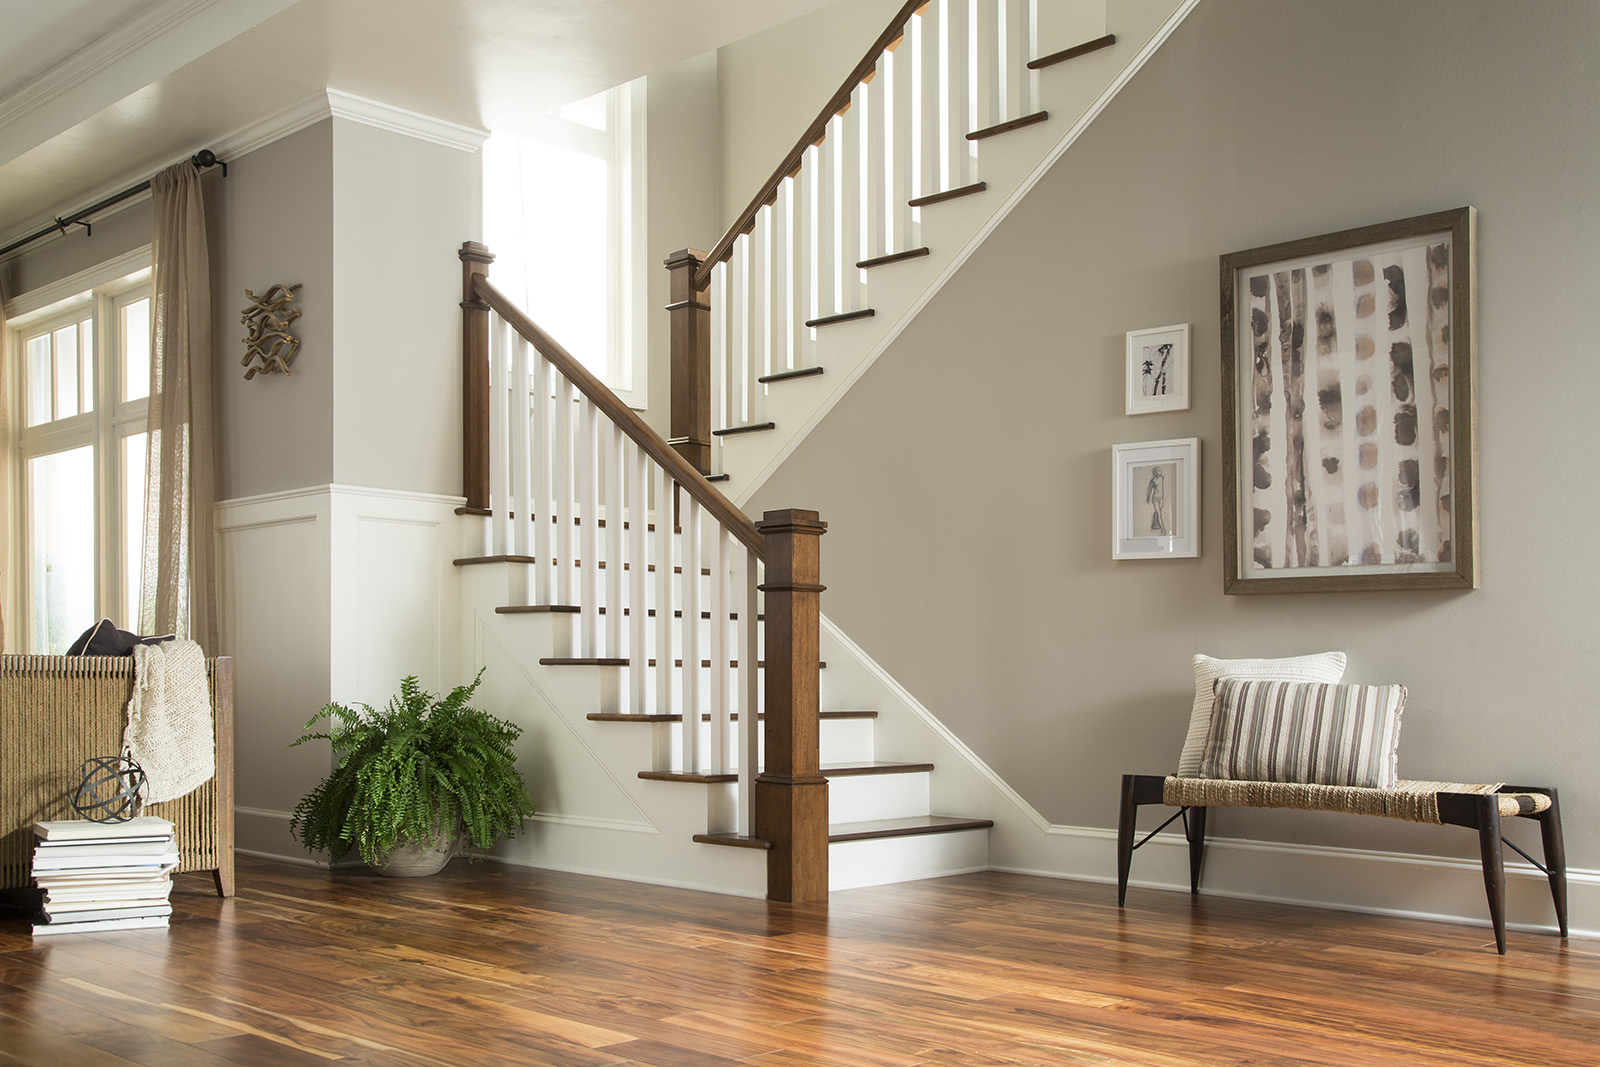 Stair Design Considerations The House Designers,Entrance Living Room Middle Class Indian Home Interior Design